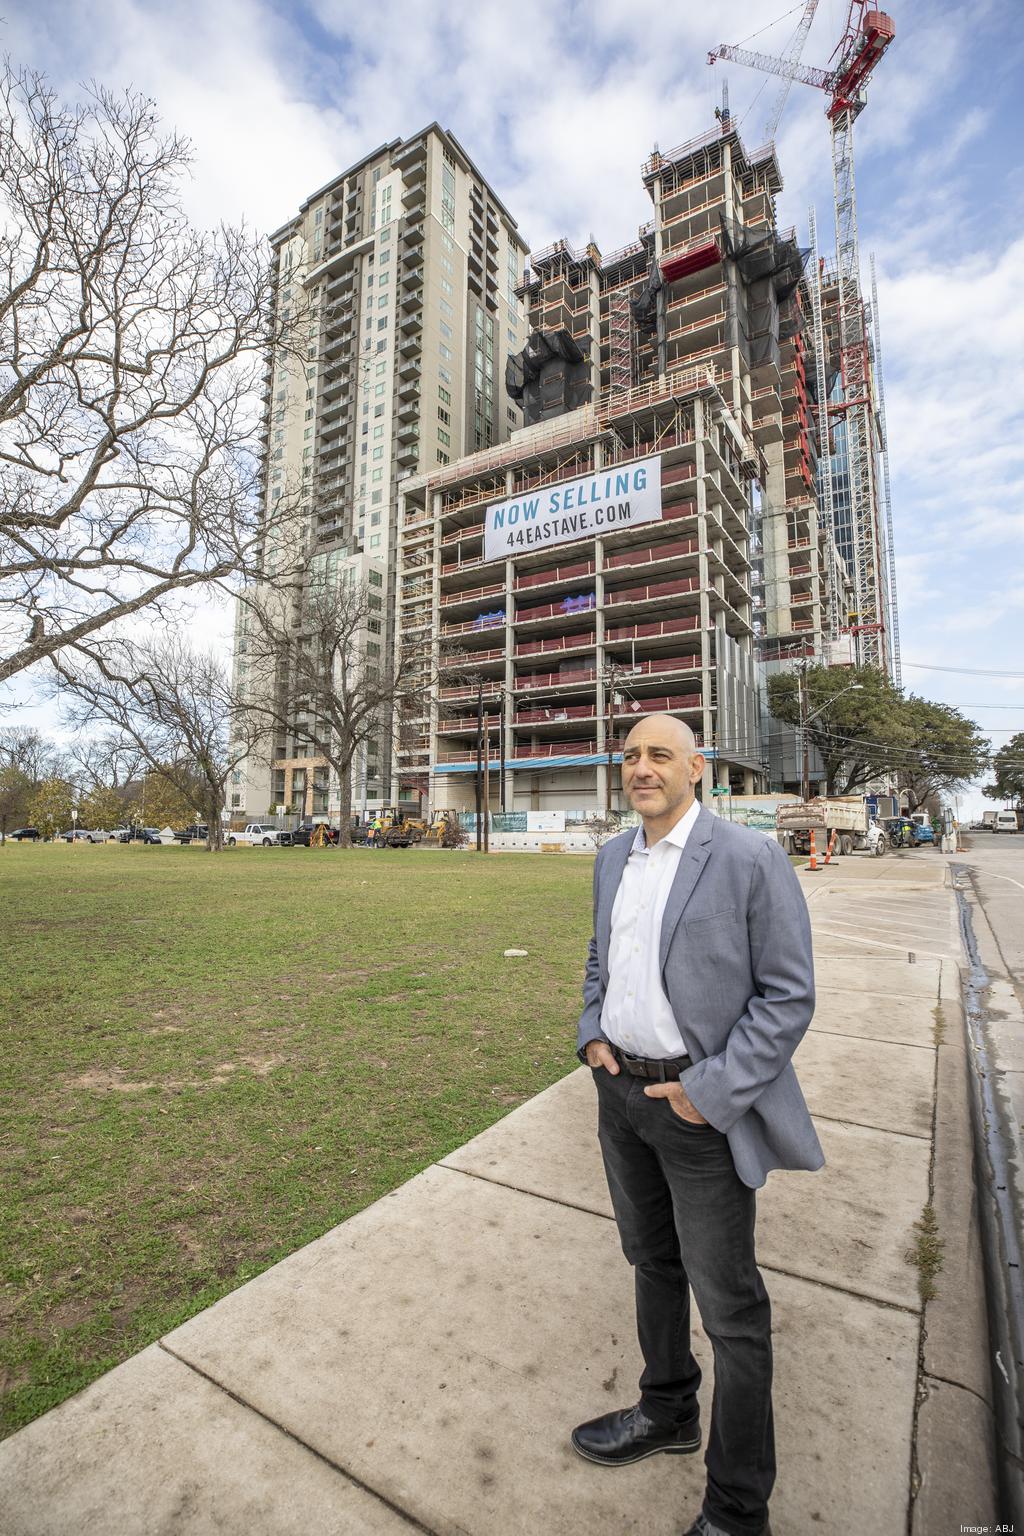 Are Austin's affordable housing programs at risk? - Austin Business Journal